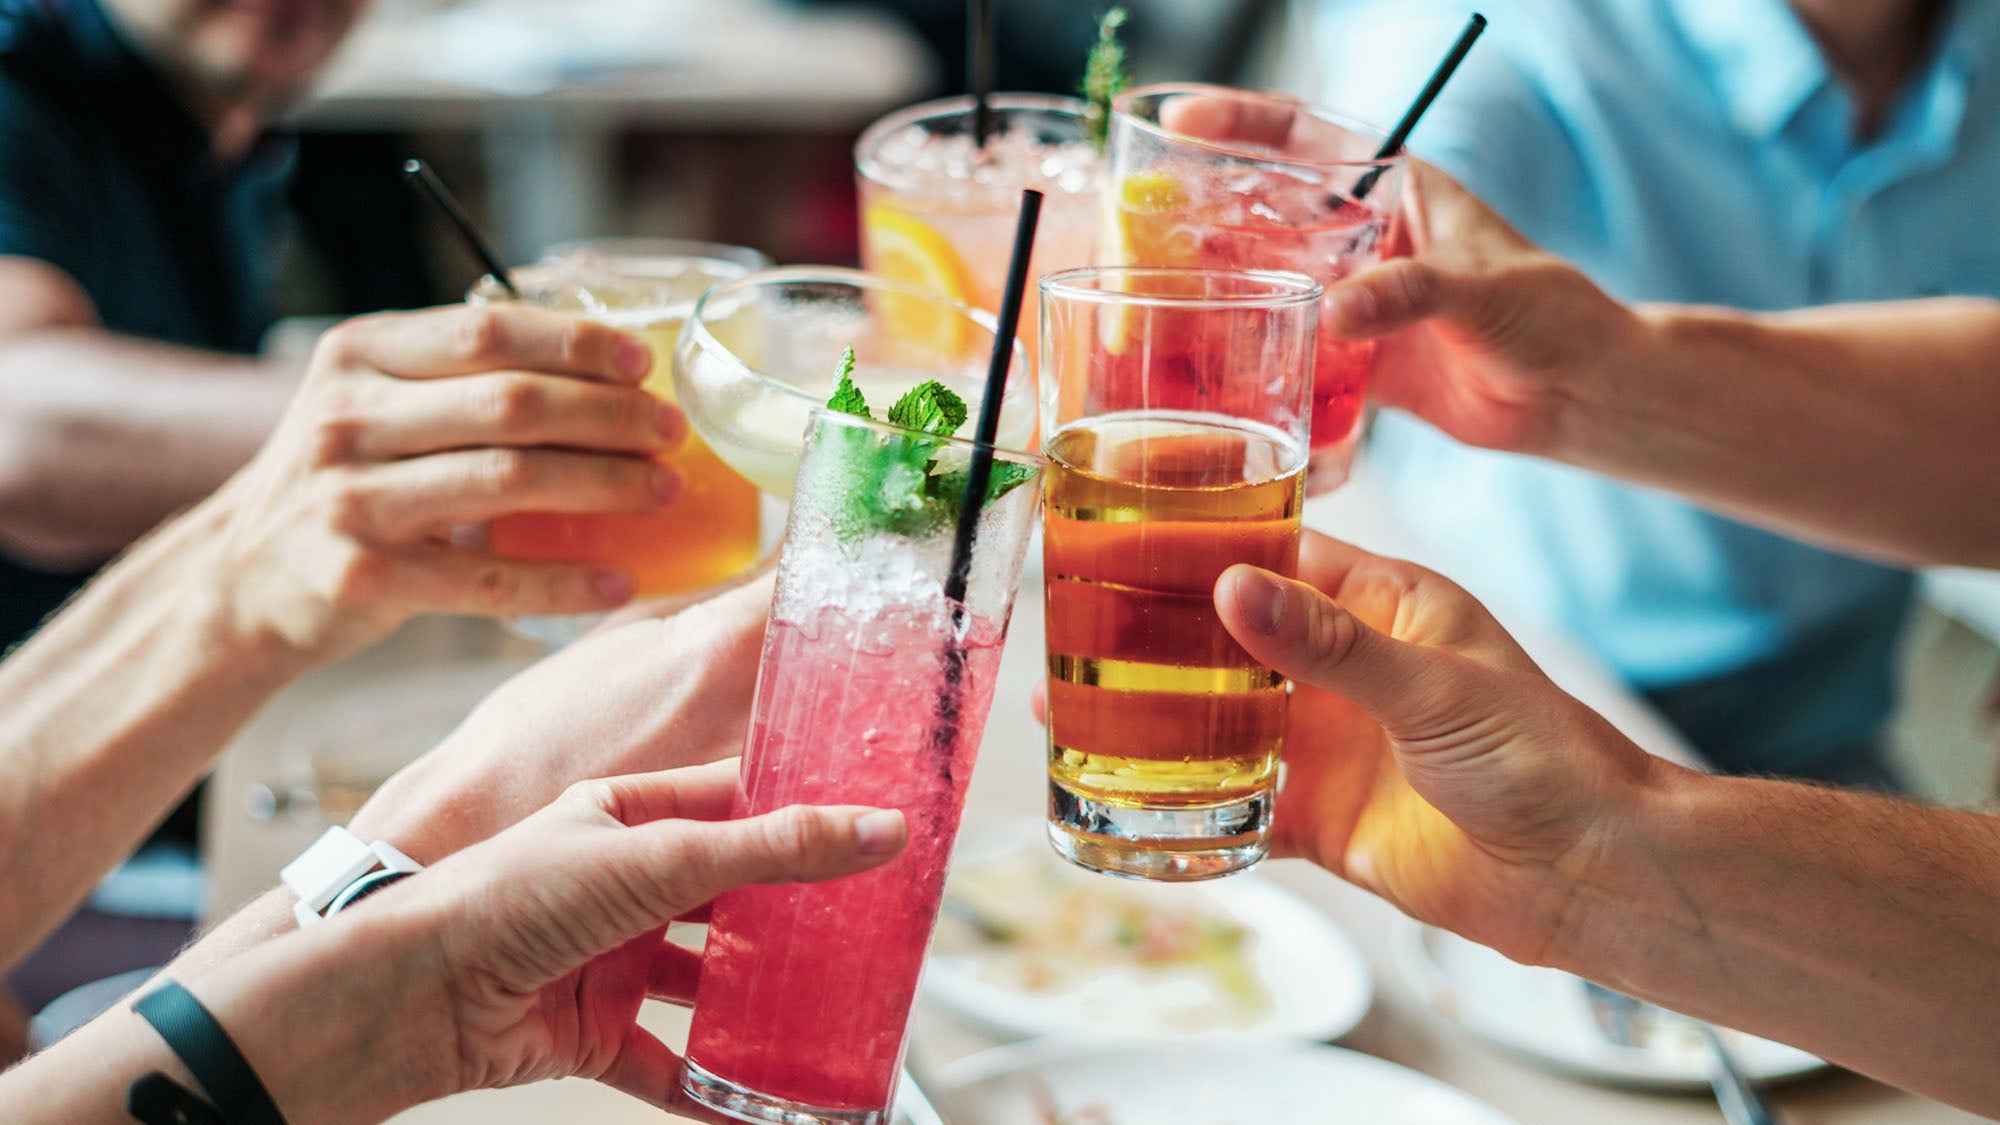 How Much Alcohol Is In My Drink? Learn All the Factors to Consider